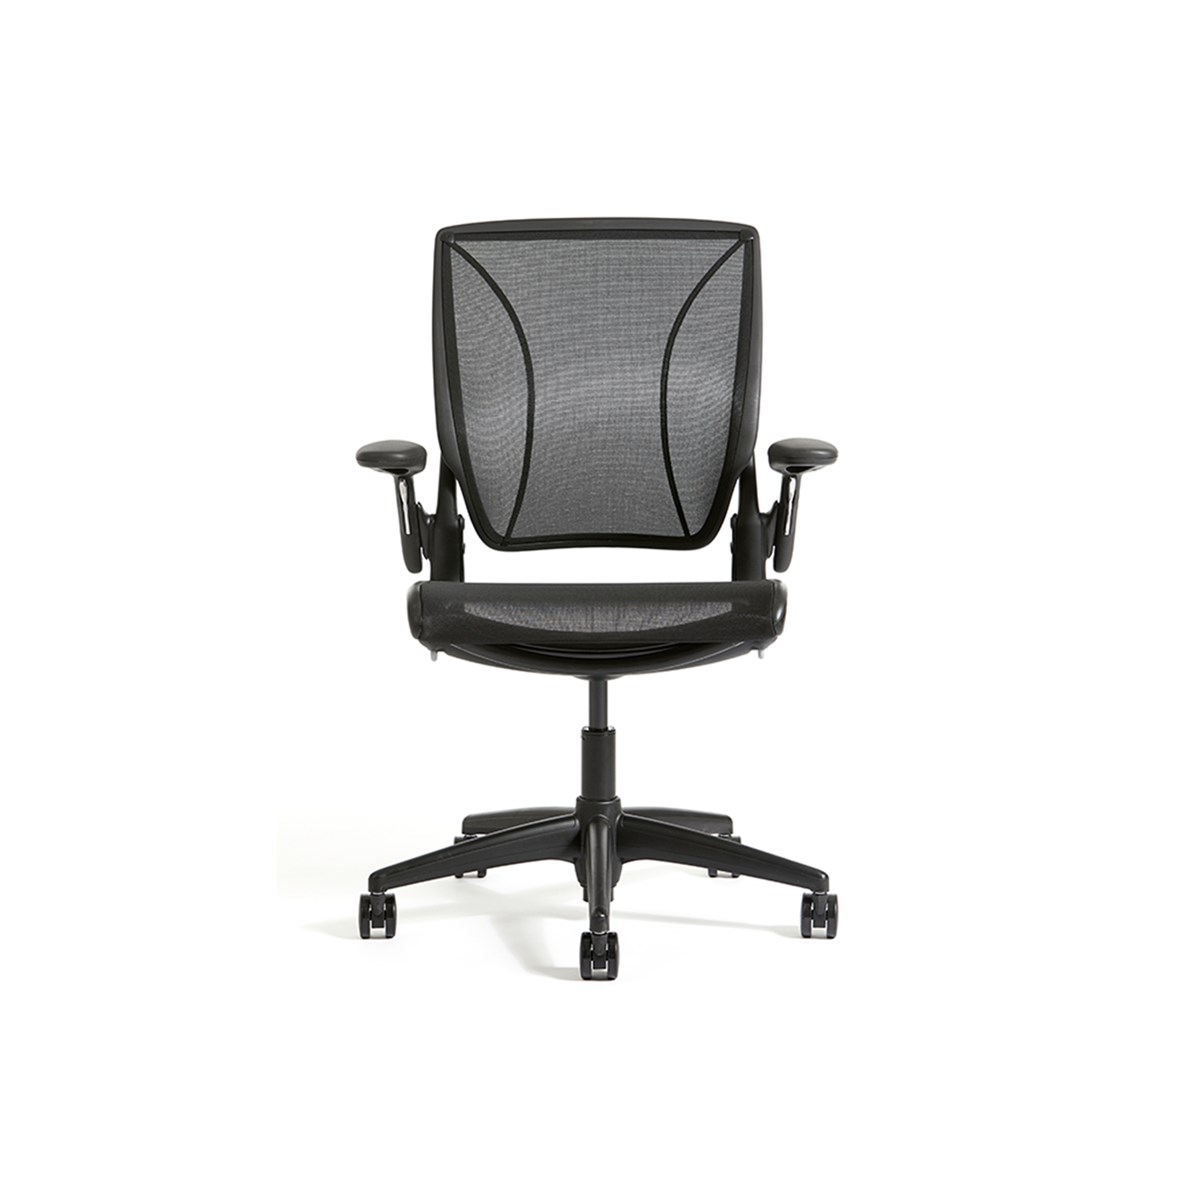 Humanscale-Niels-Diffrient-World-One-Task-Chair-Matisse-2